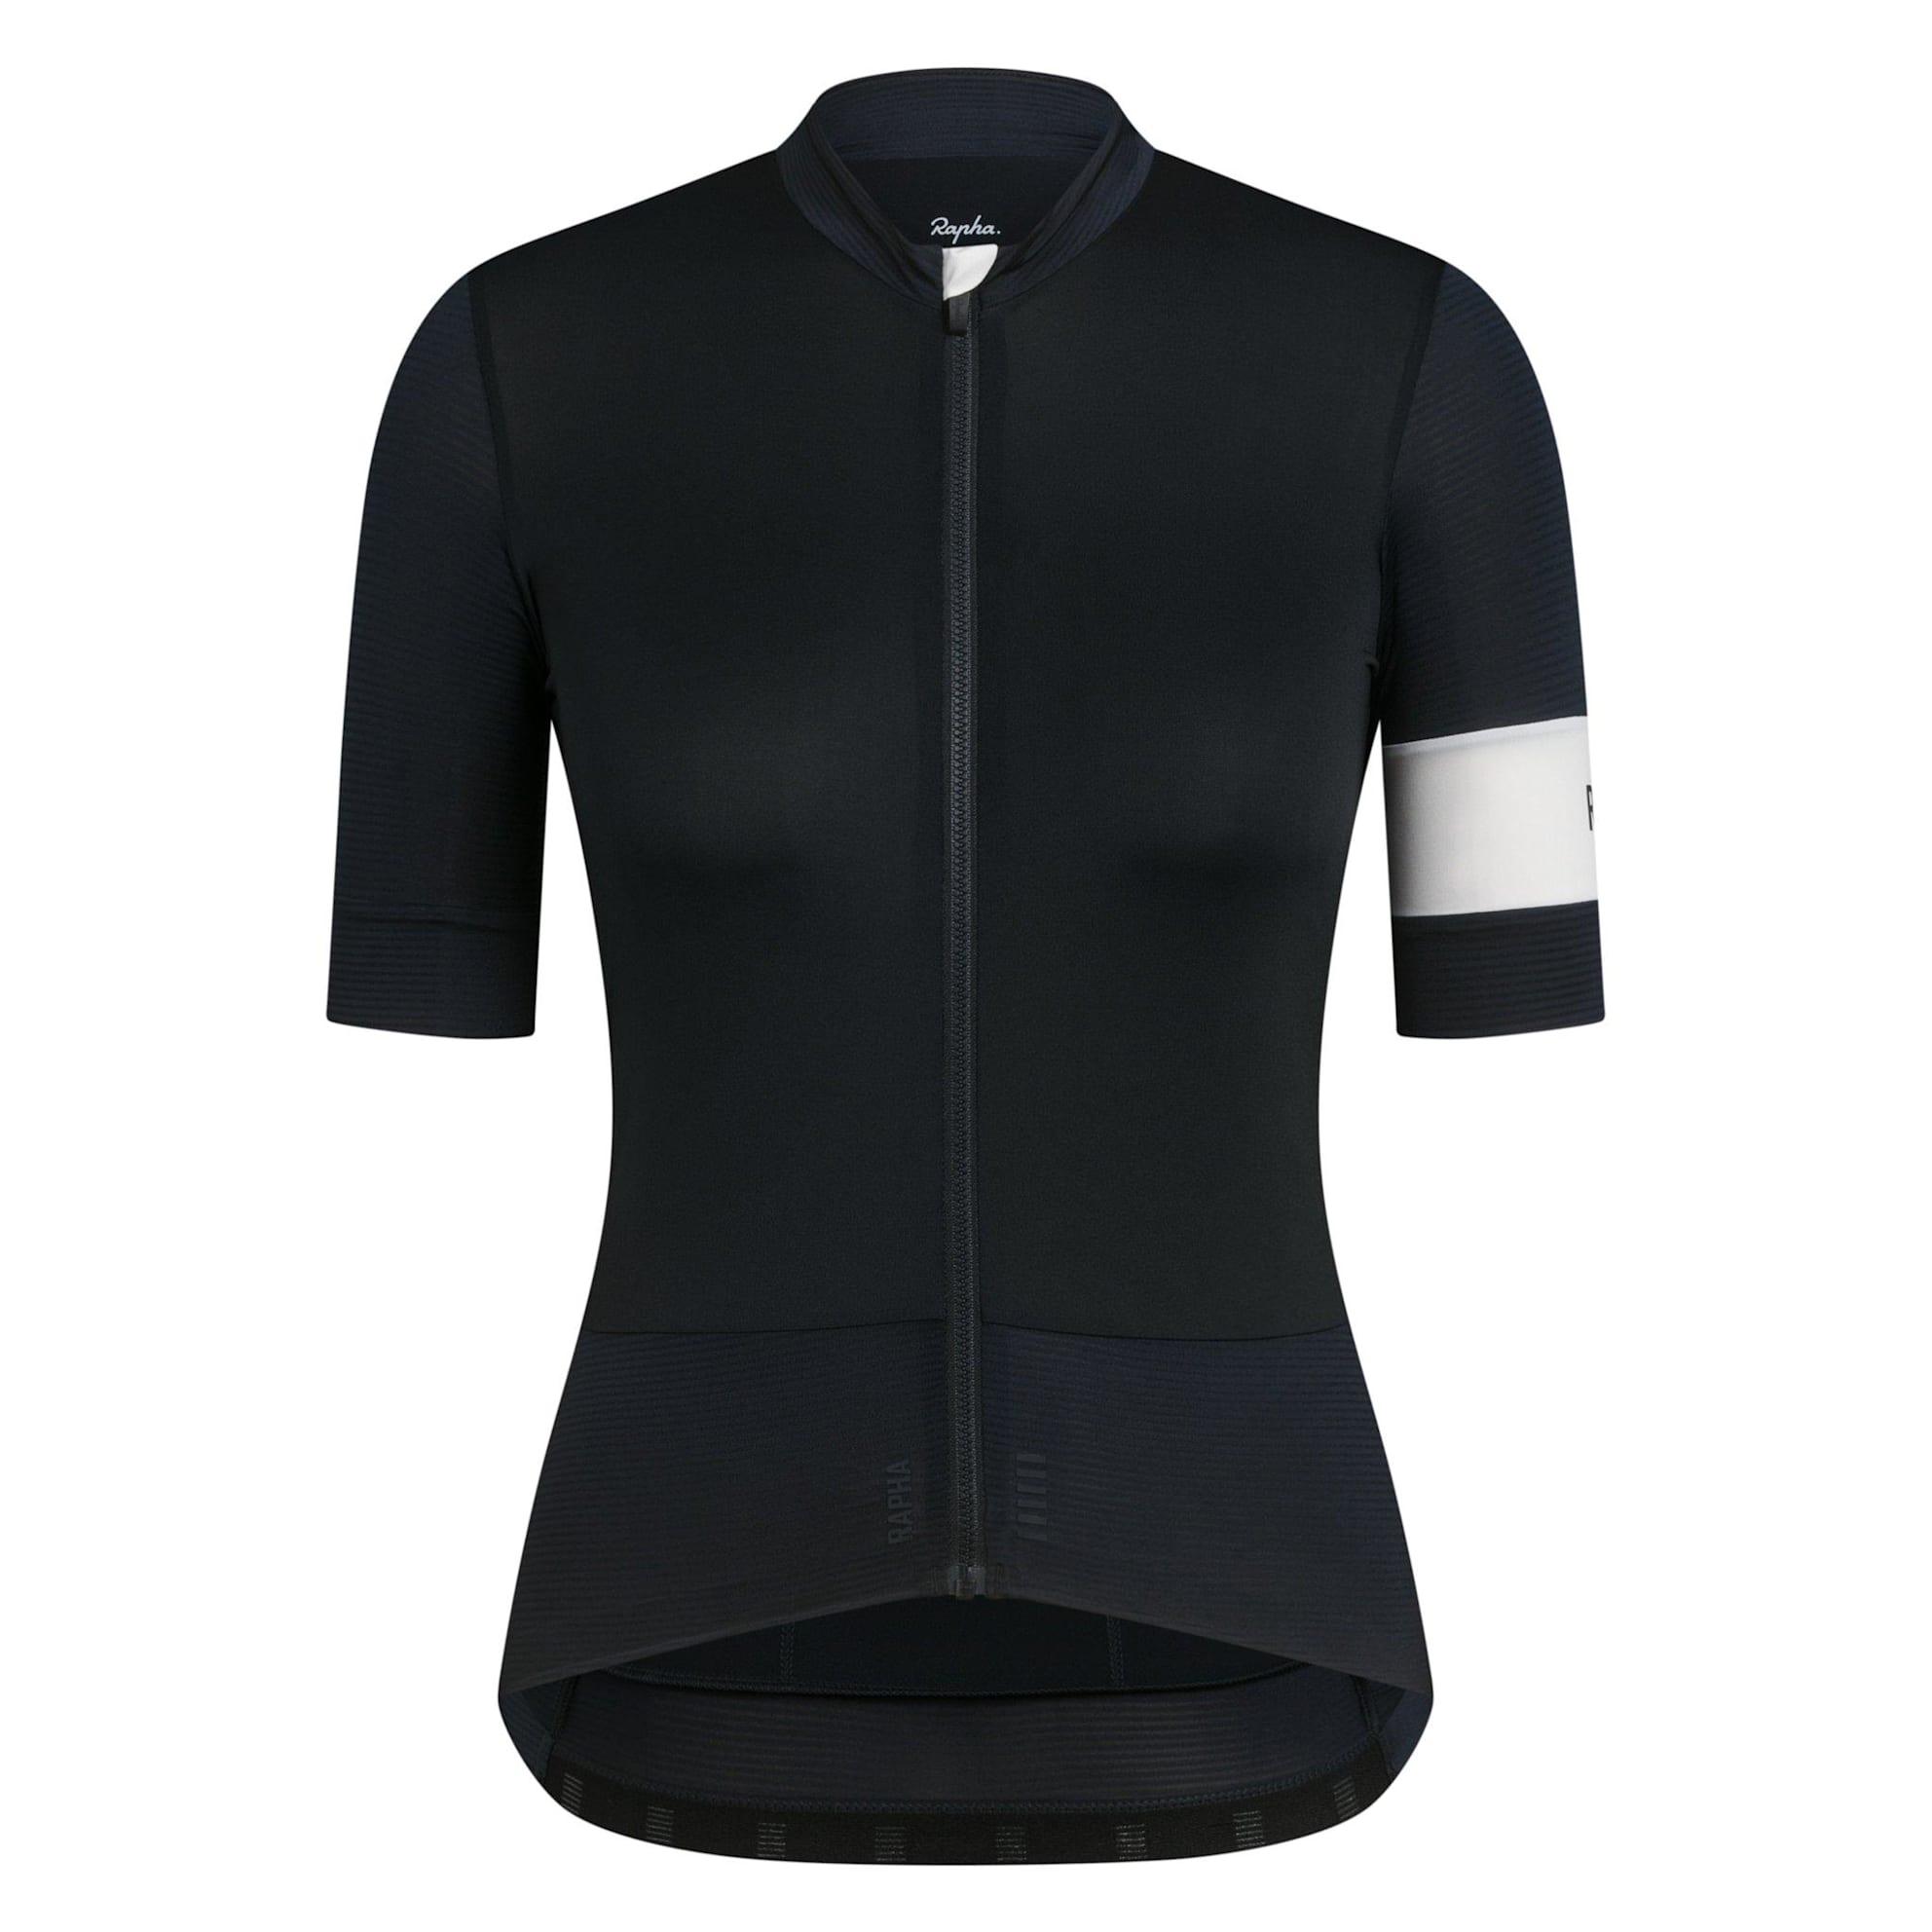 Women's Cycling Jerseys, Clothing & Accessories | Rapha Site